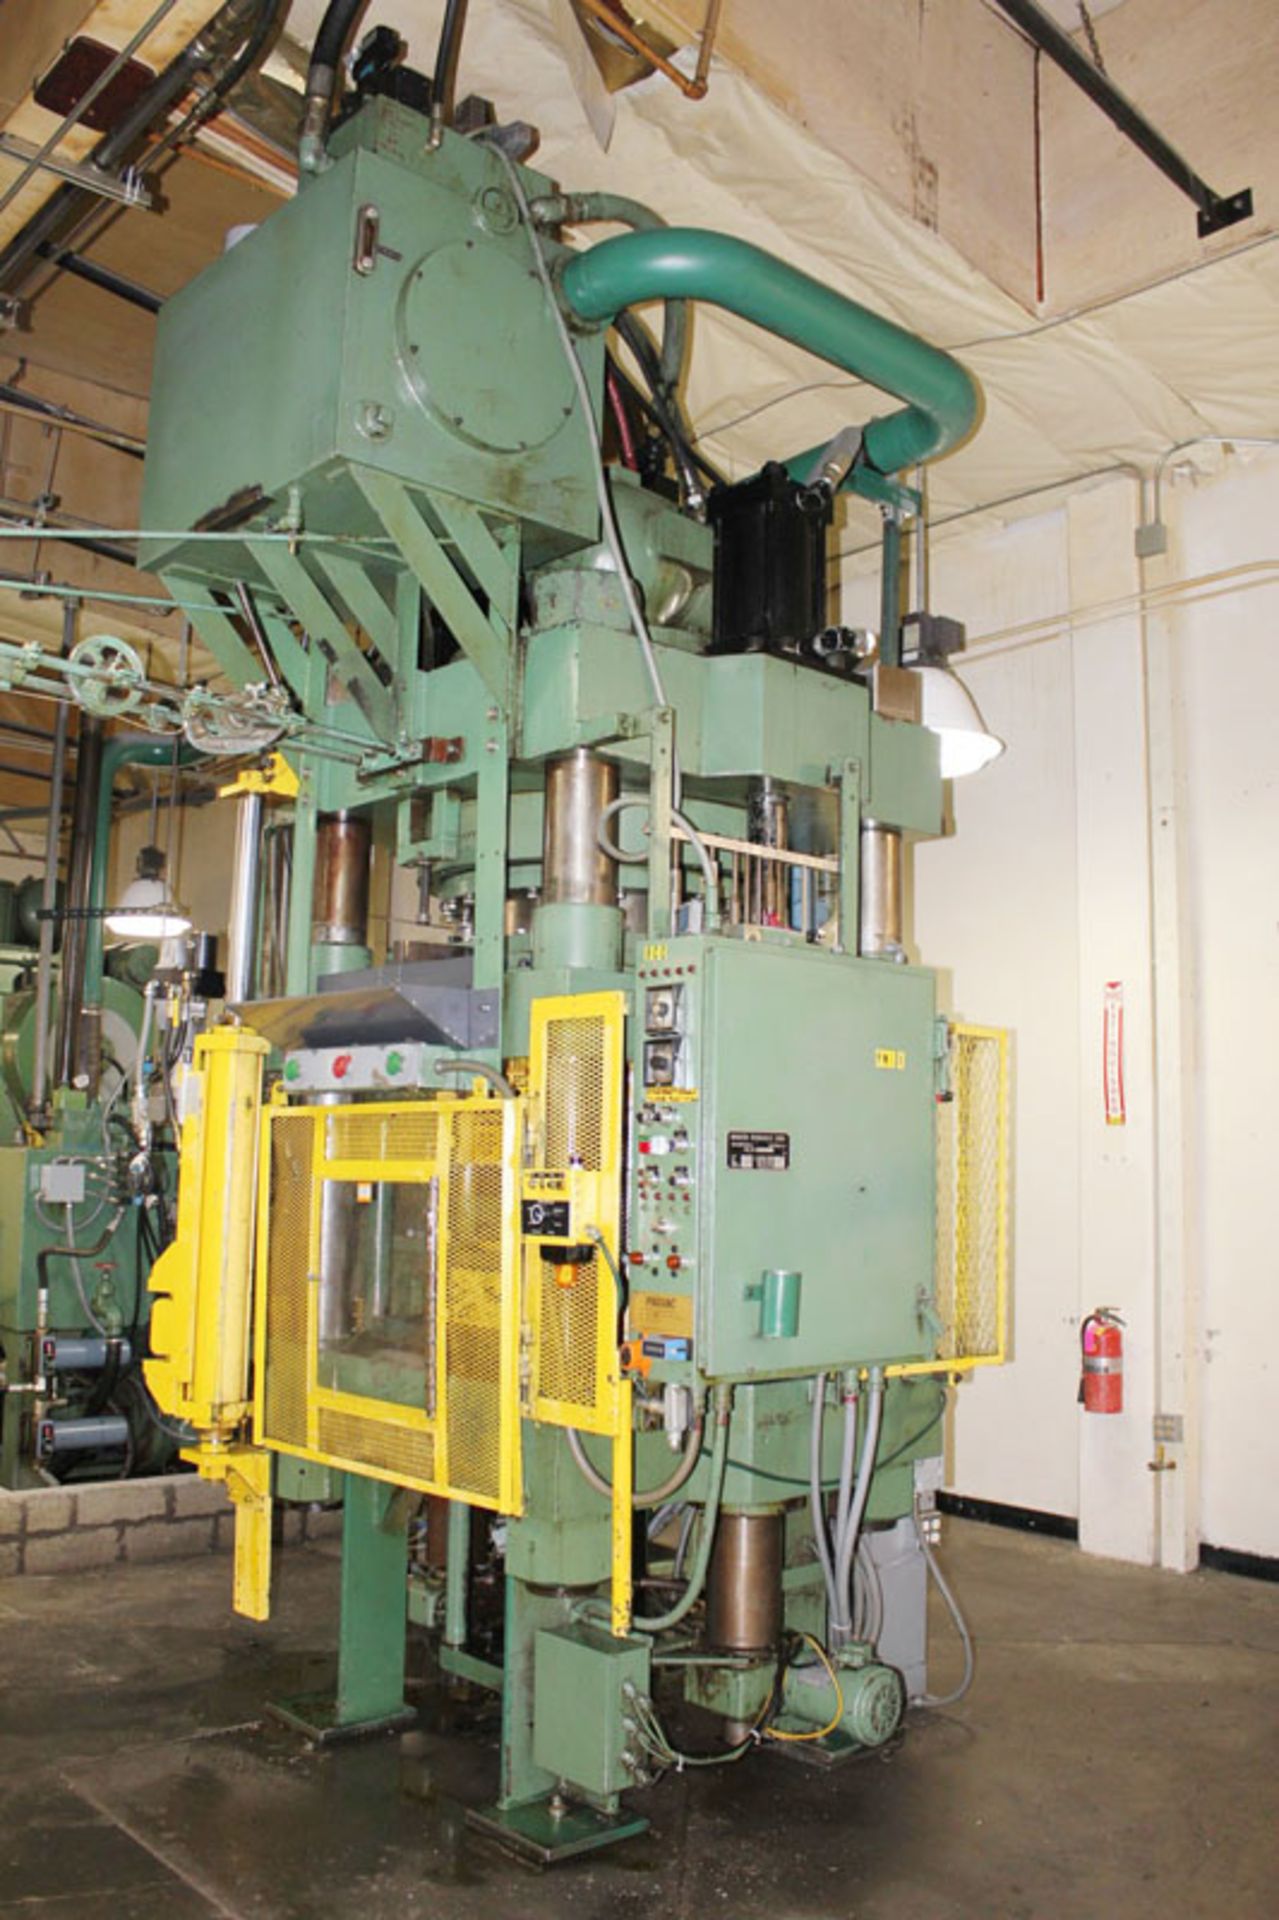 1981 800-Ton Modern Hydraulic 4 Post Press, Mdl. 1R, S/N: 2249, Located in Huntington Park, CA - Image 5 of 14